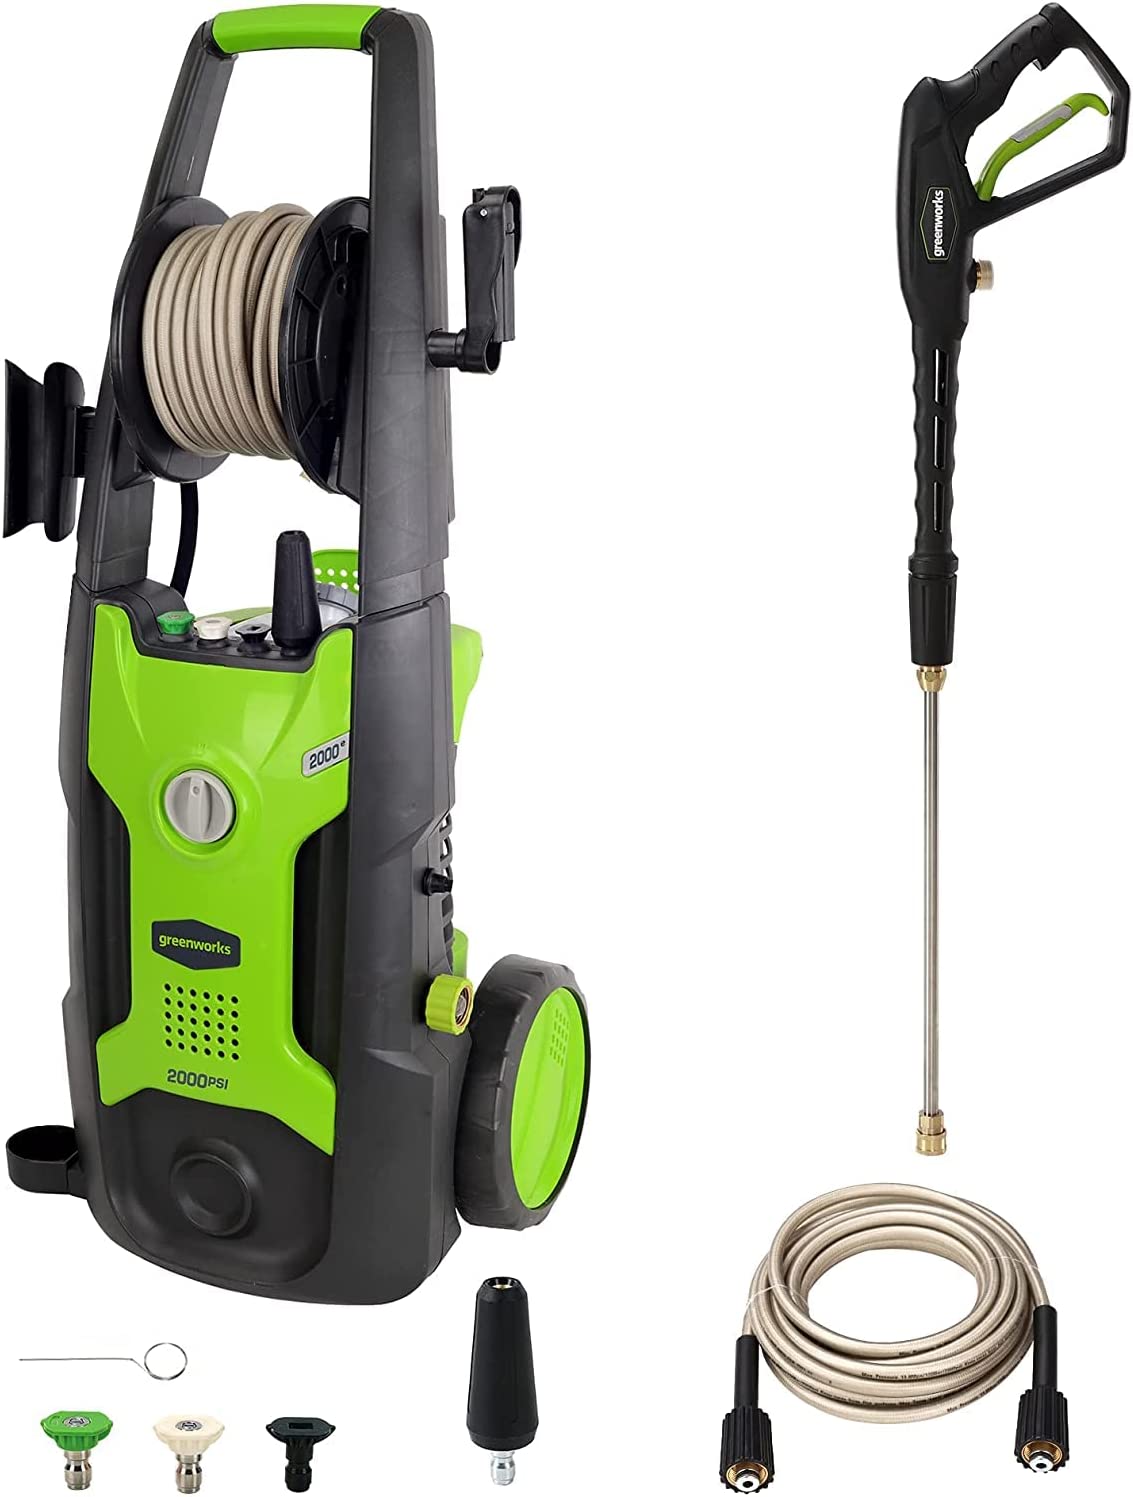 Greenworks 2000 PSI 13 Amp 1.2 GPM Pressure Washer with Hose Reel (PWMA Certified)